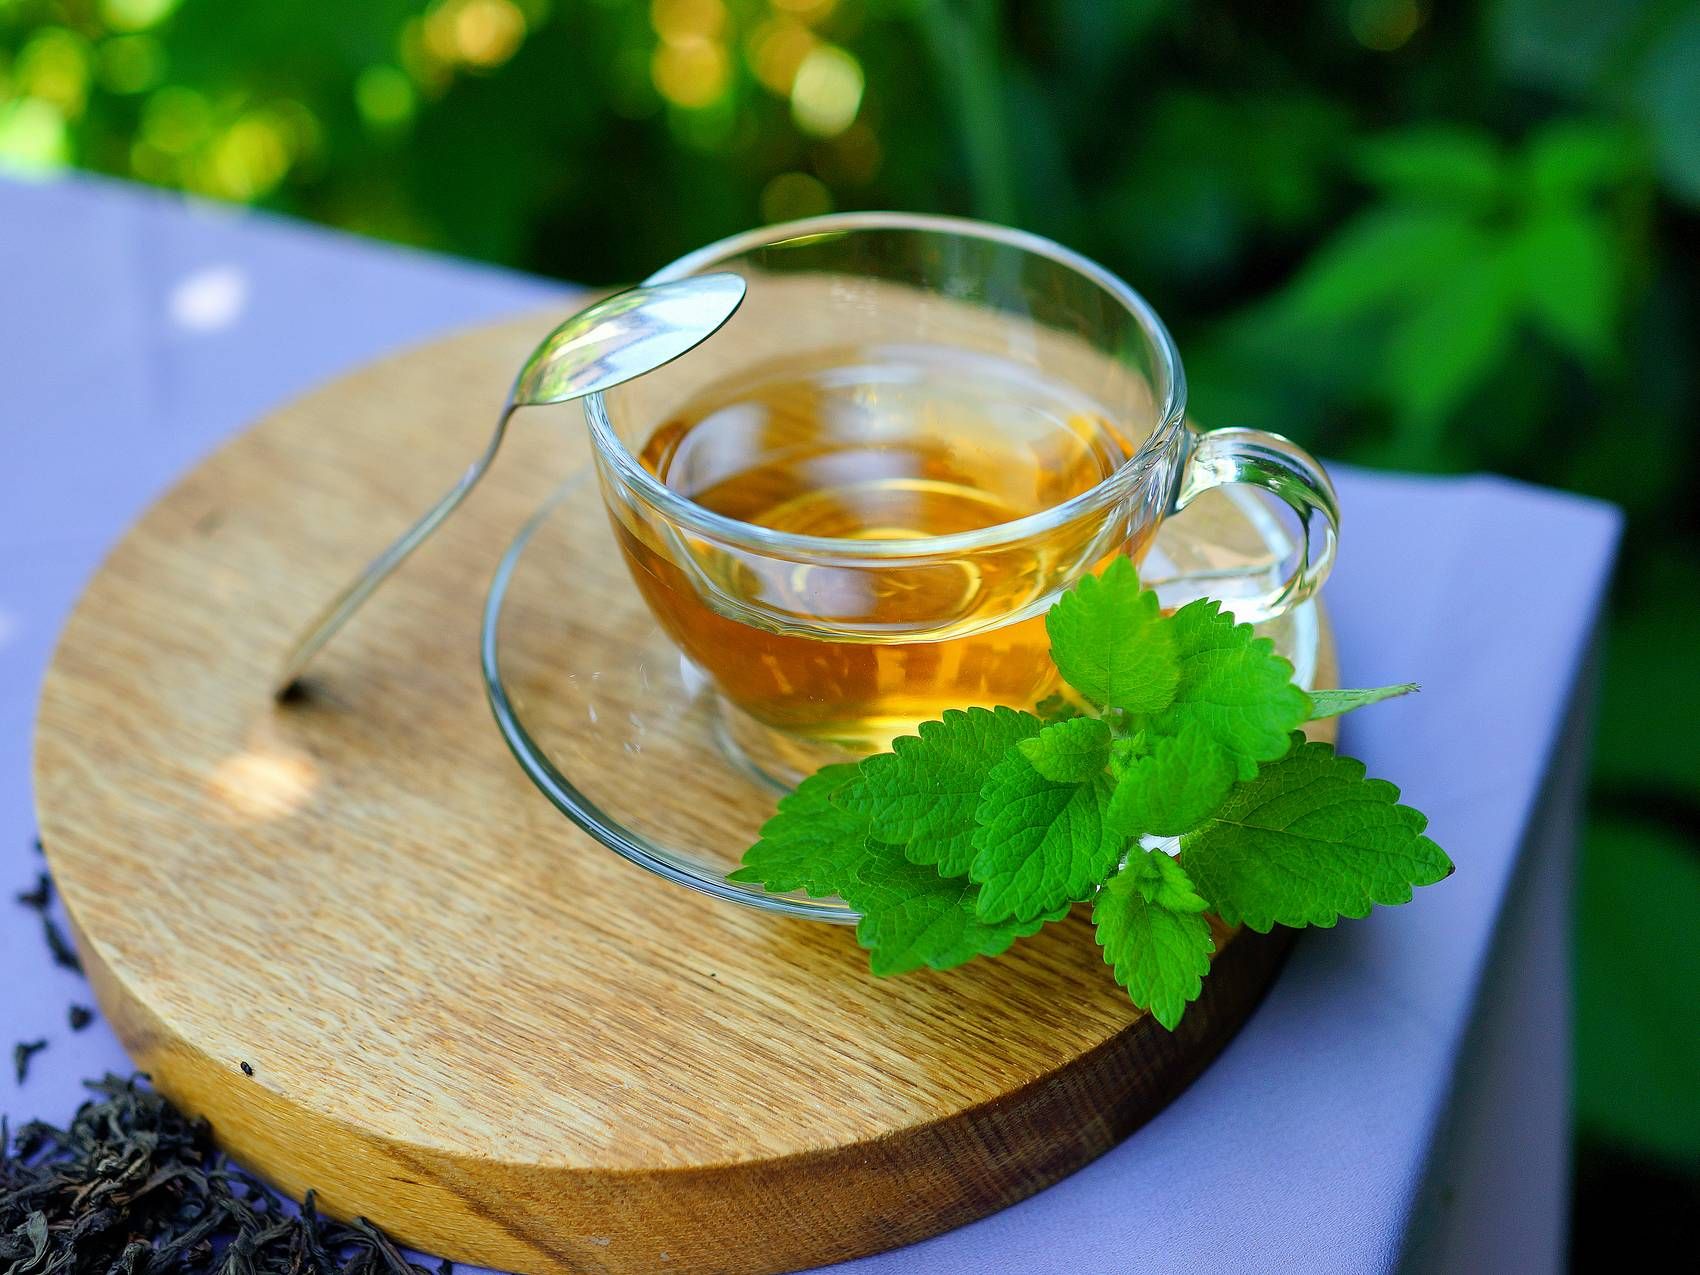 A fresh cup of mint tea can be enjoyed year-round.